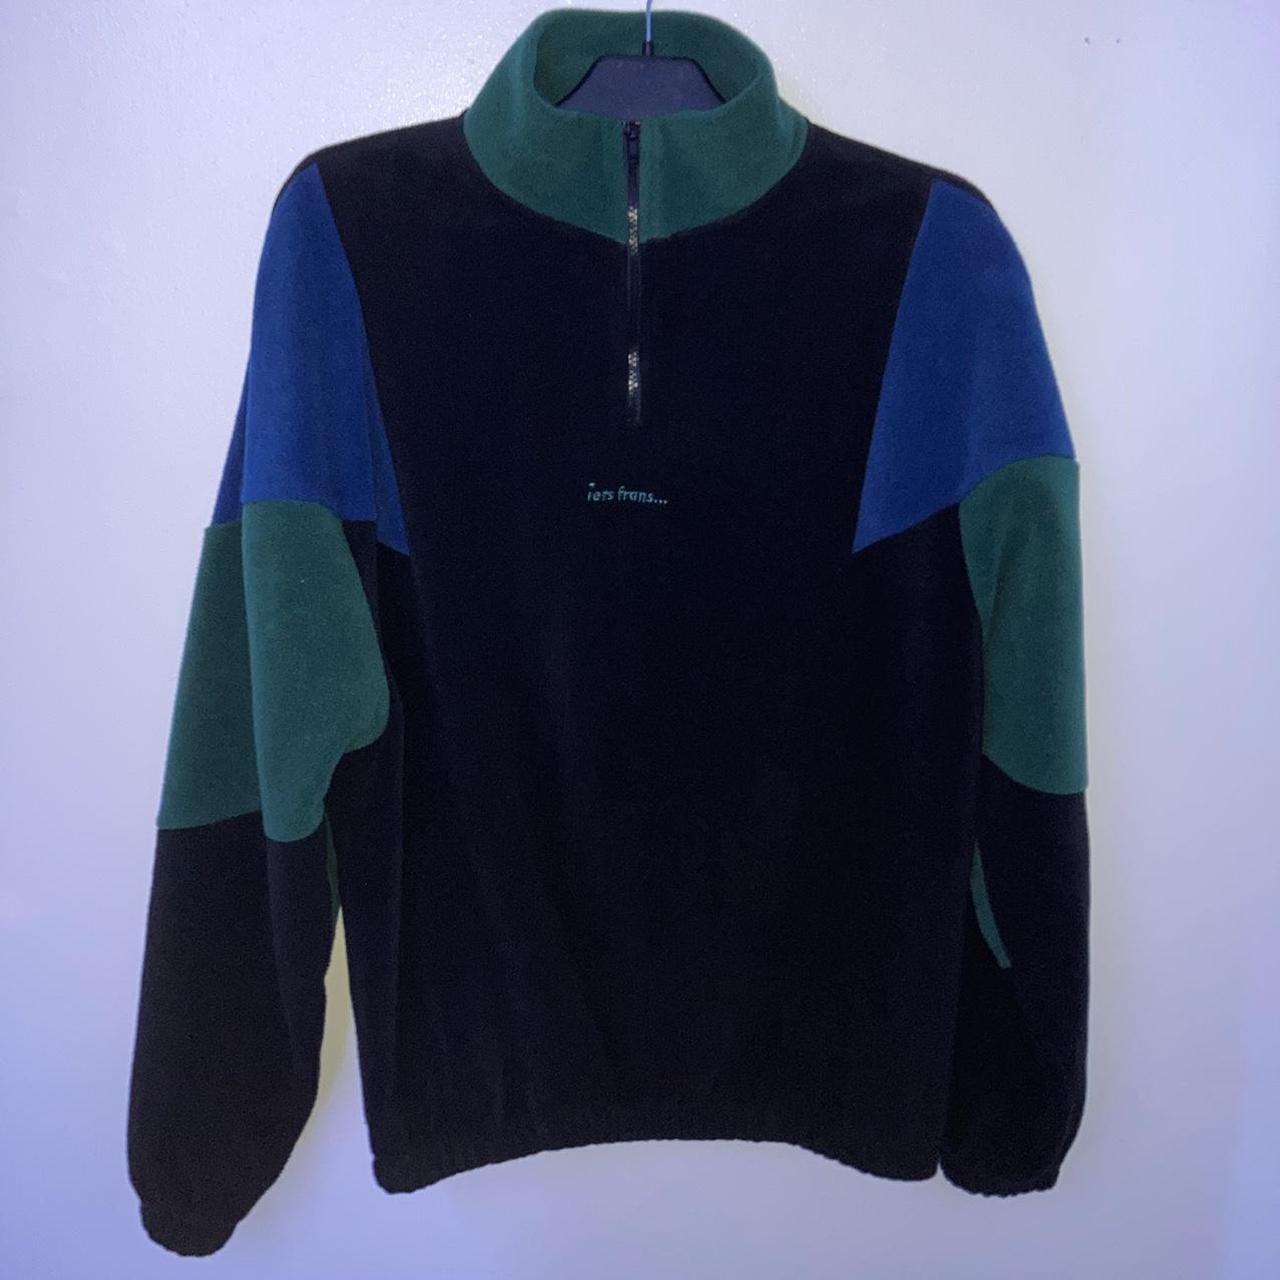 Urban Outfitters Iets Frans Fleece (SOLD OUT... - Depop